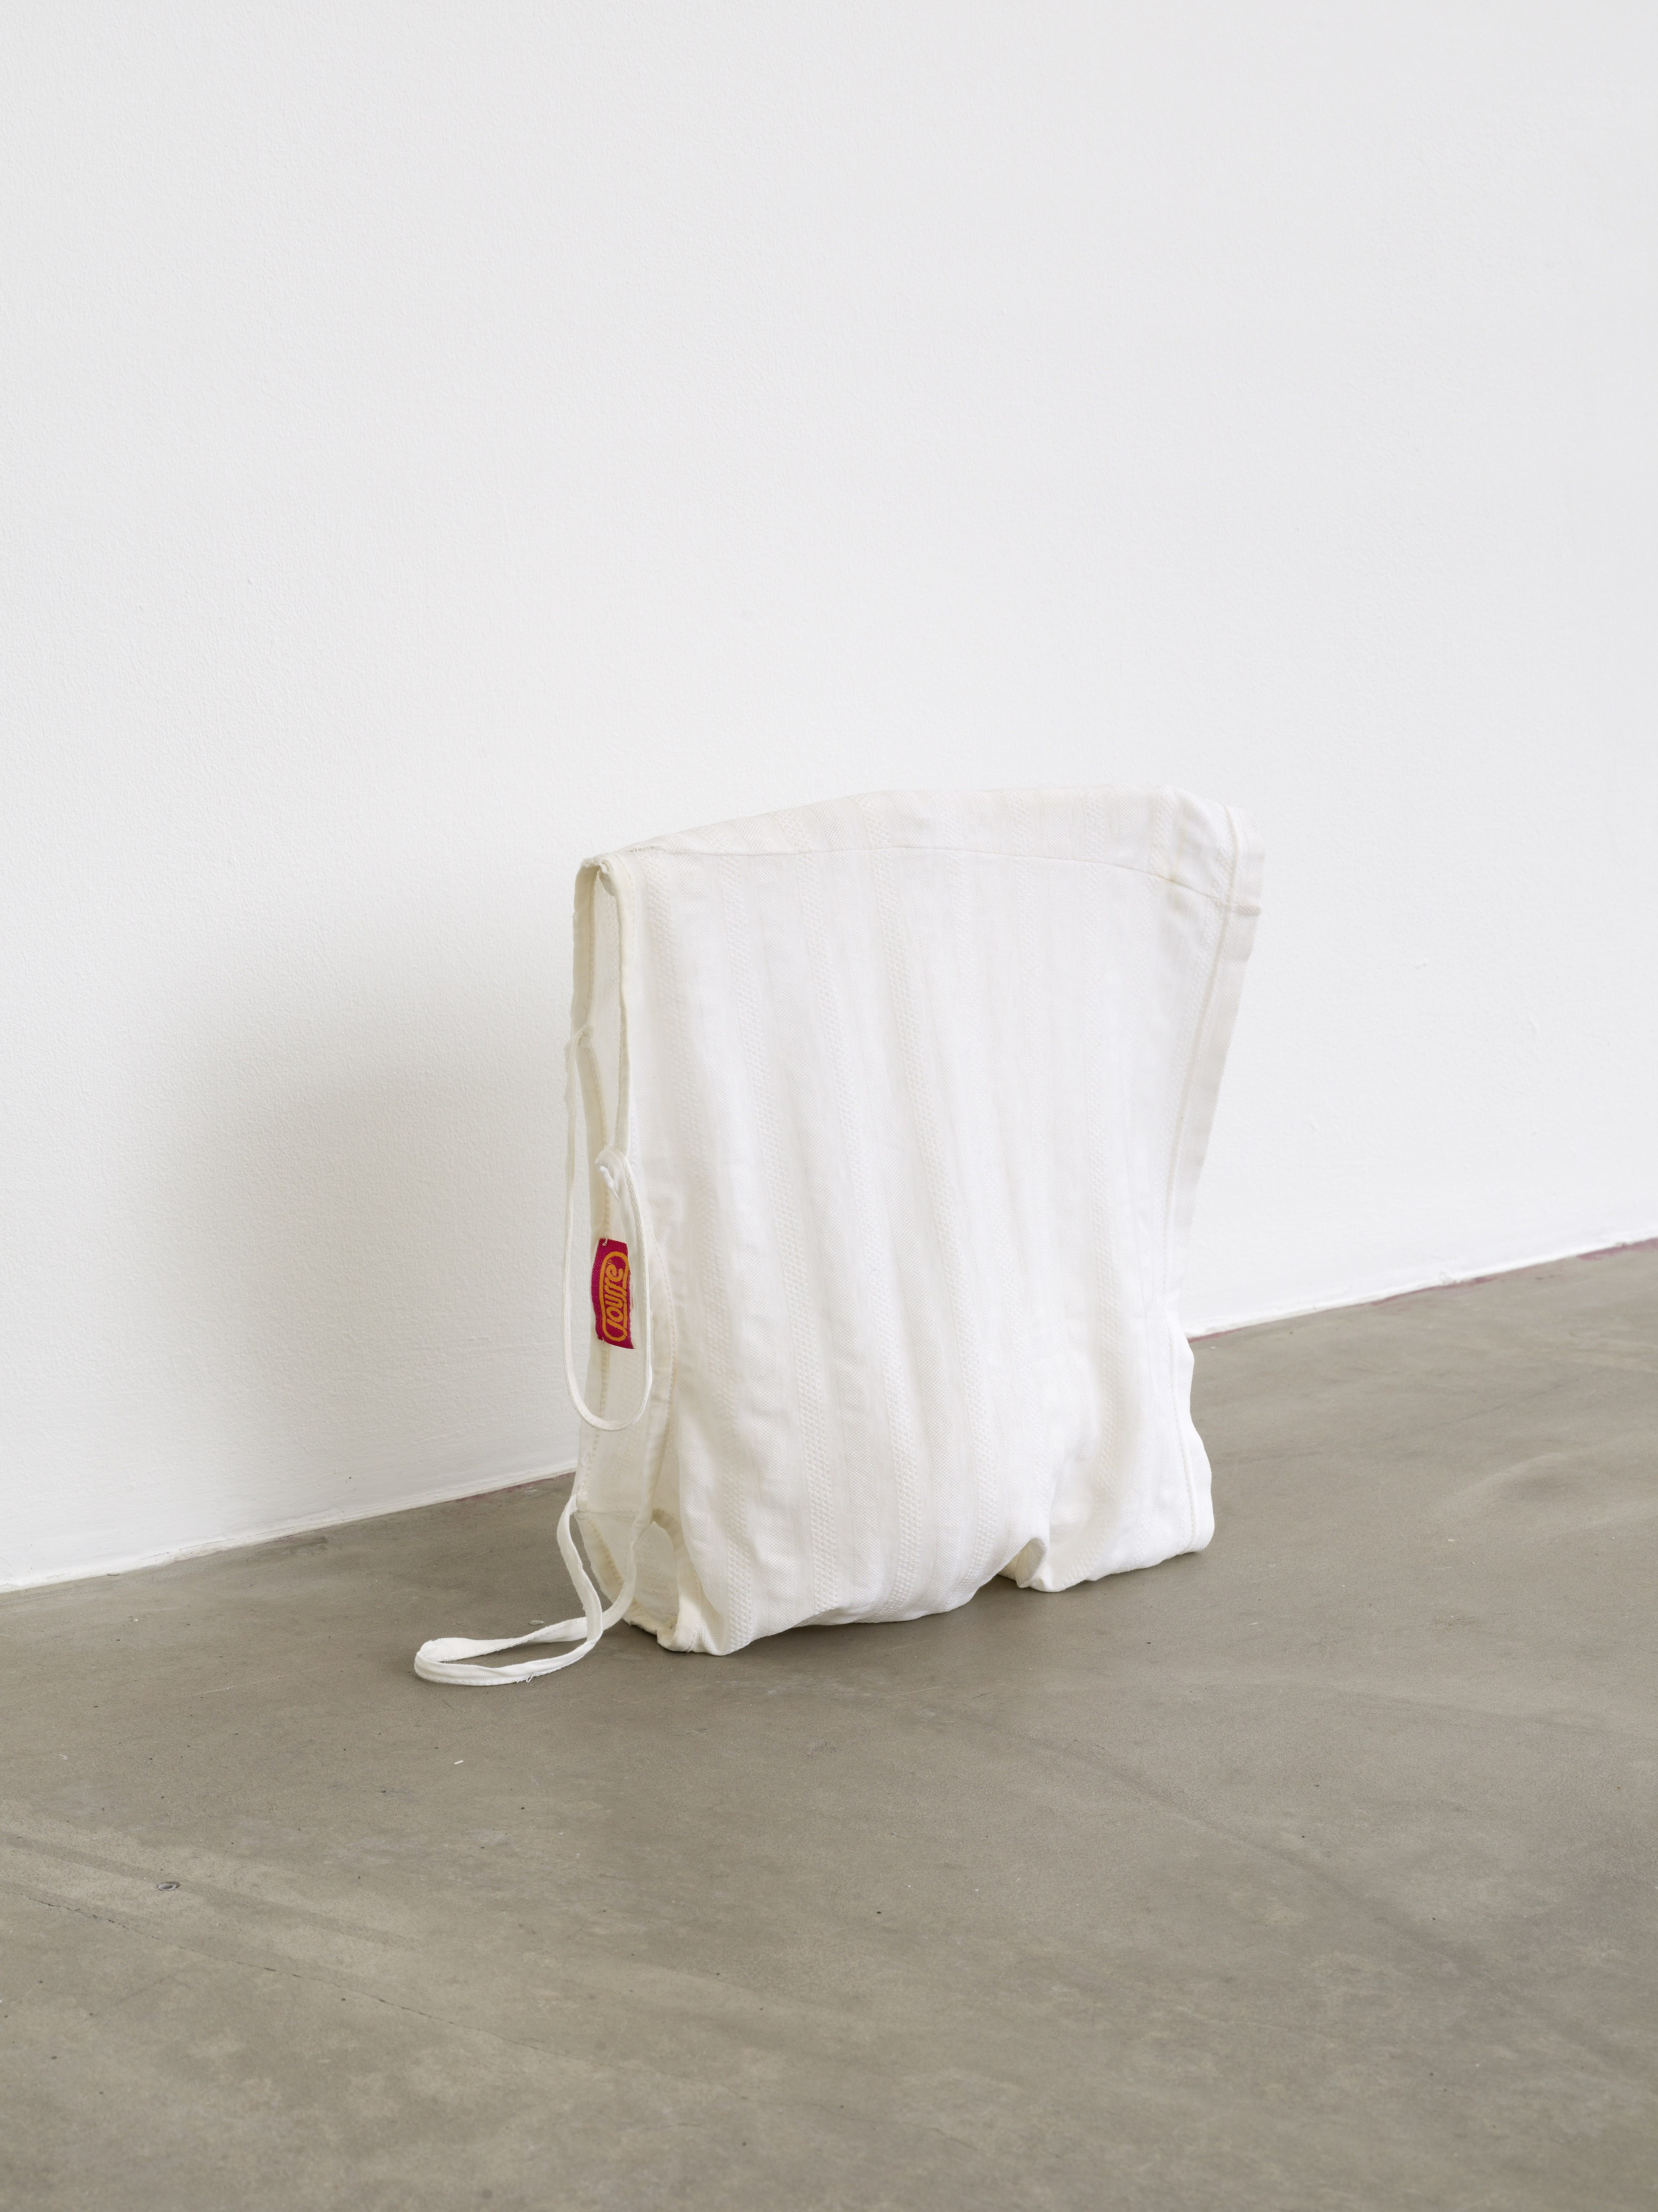 Cathy Wilkes, „Untitled“, 2024, Mixed media, 35,6 x 38,9 x 15,6 cm